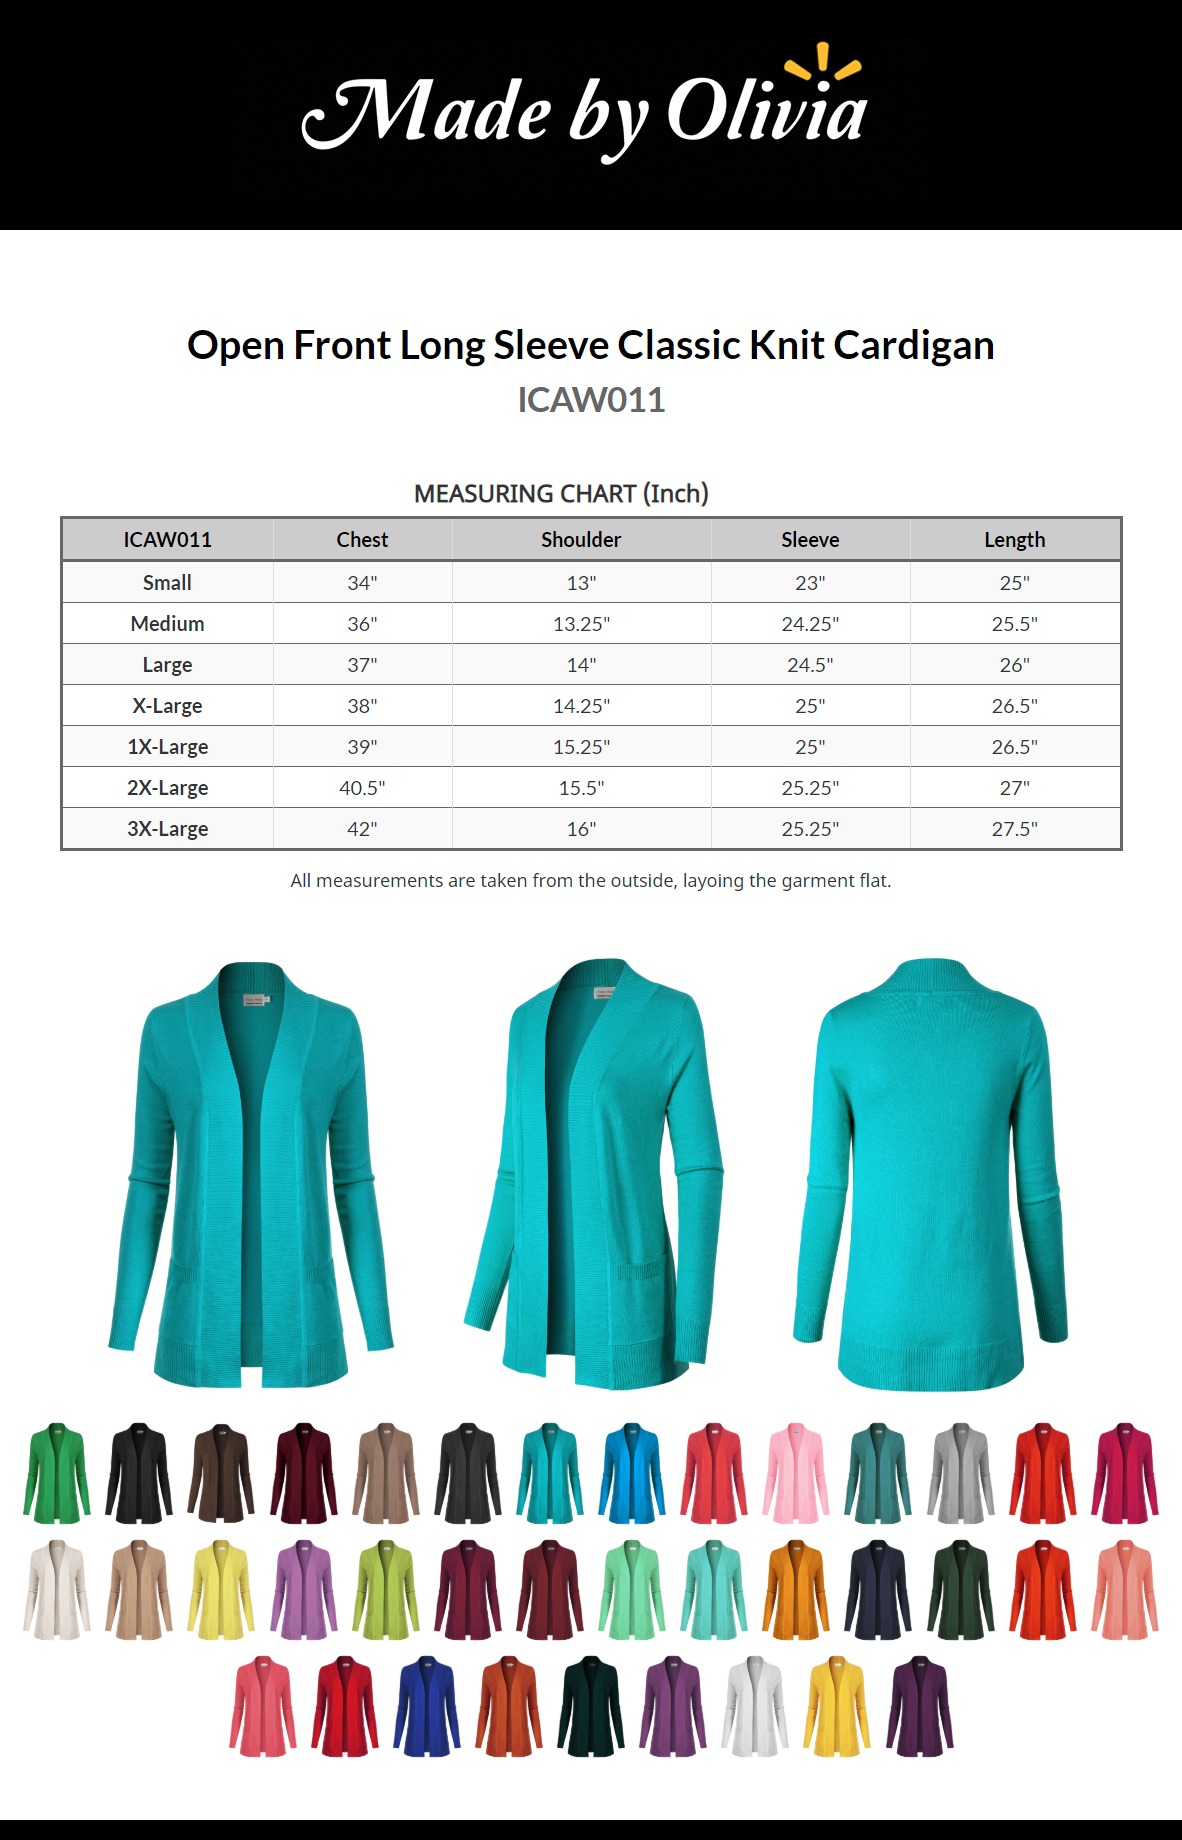 Made by Olivia Women's Open Front Long Sleeve Classic Knit Cardigan - image 2 of 3